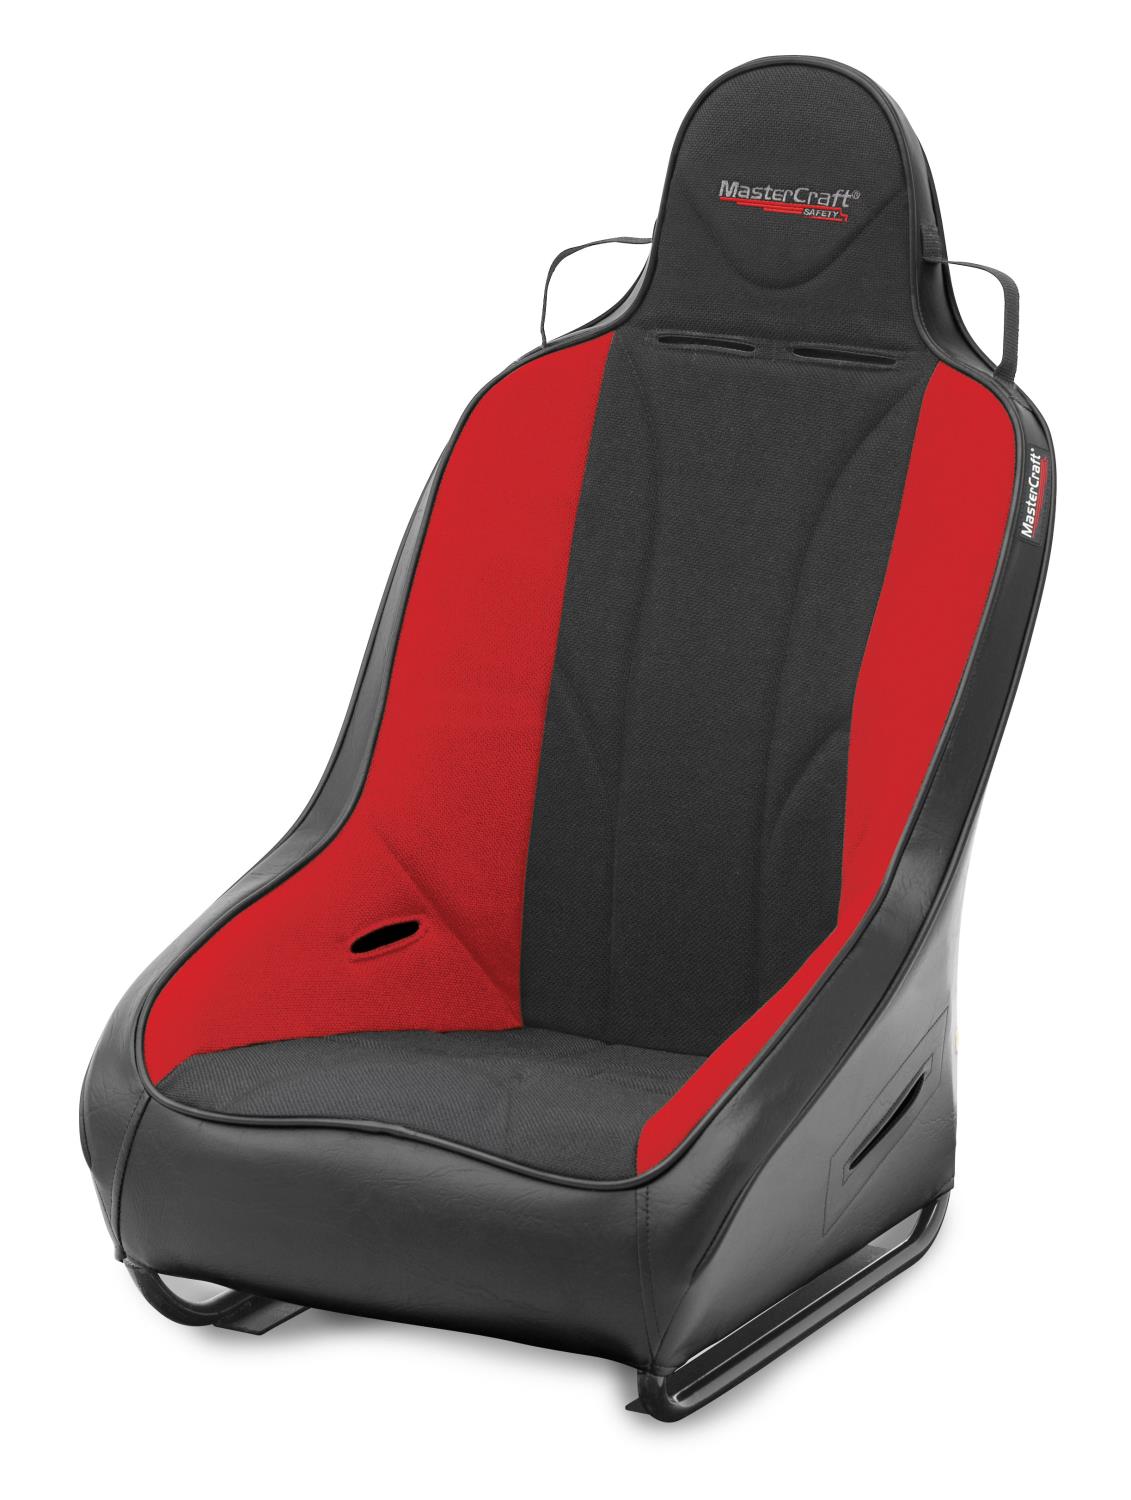 560112 1 in. WIDER PROSeat w/Fixed Headrest, Black with Black Fabric Center and Red Side Panels, Black Band w/BRS Stitch Pattern